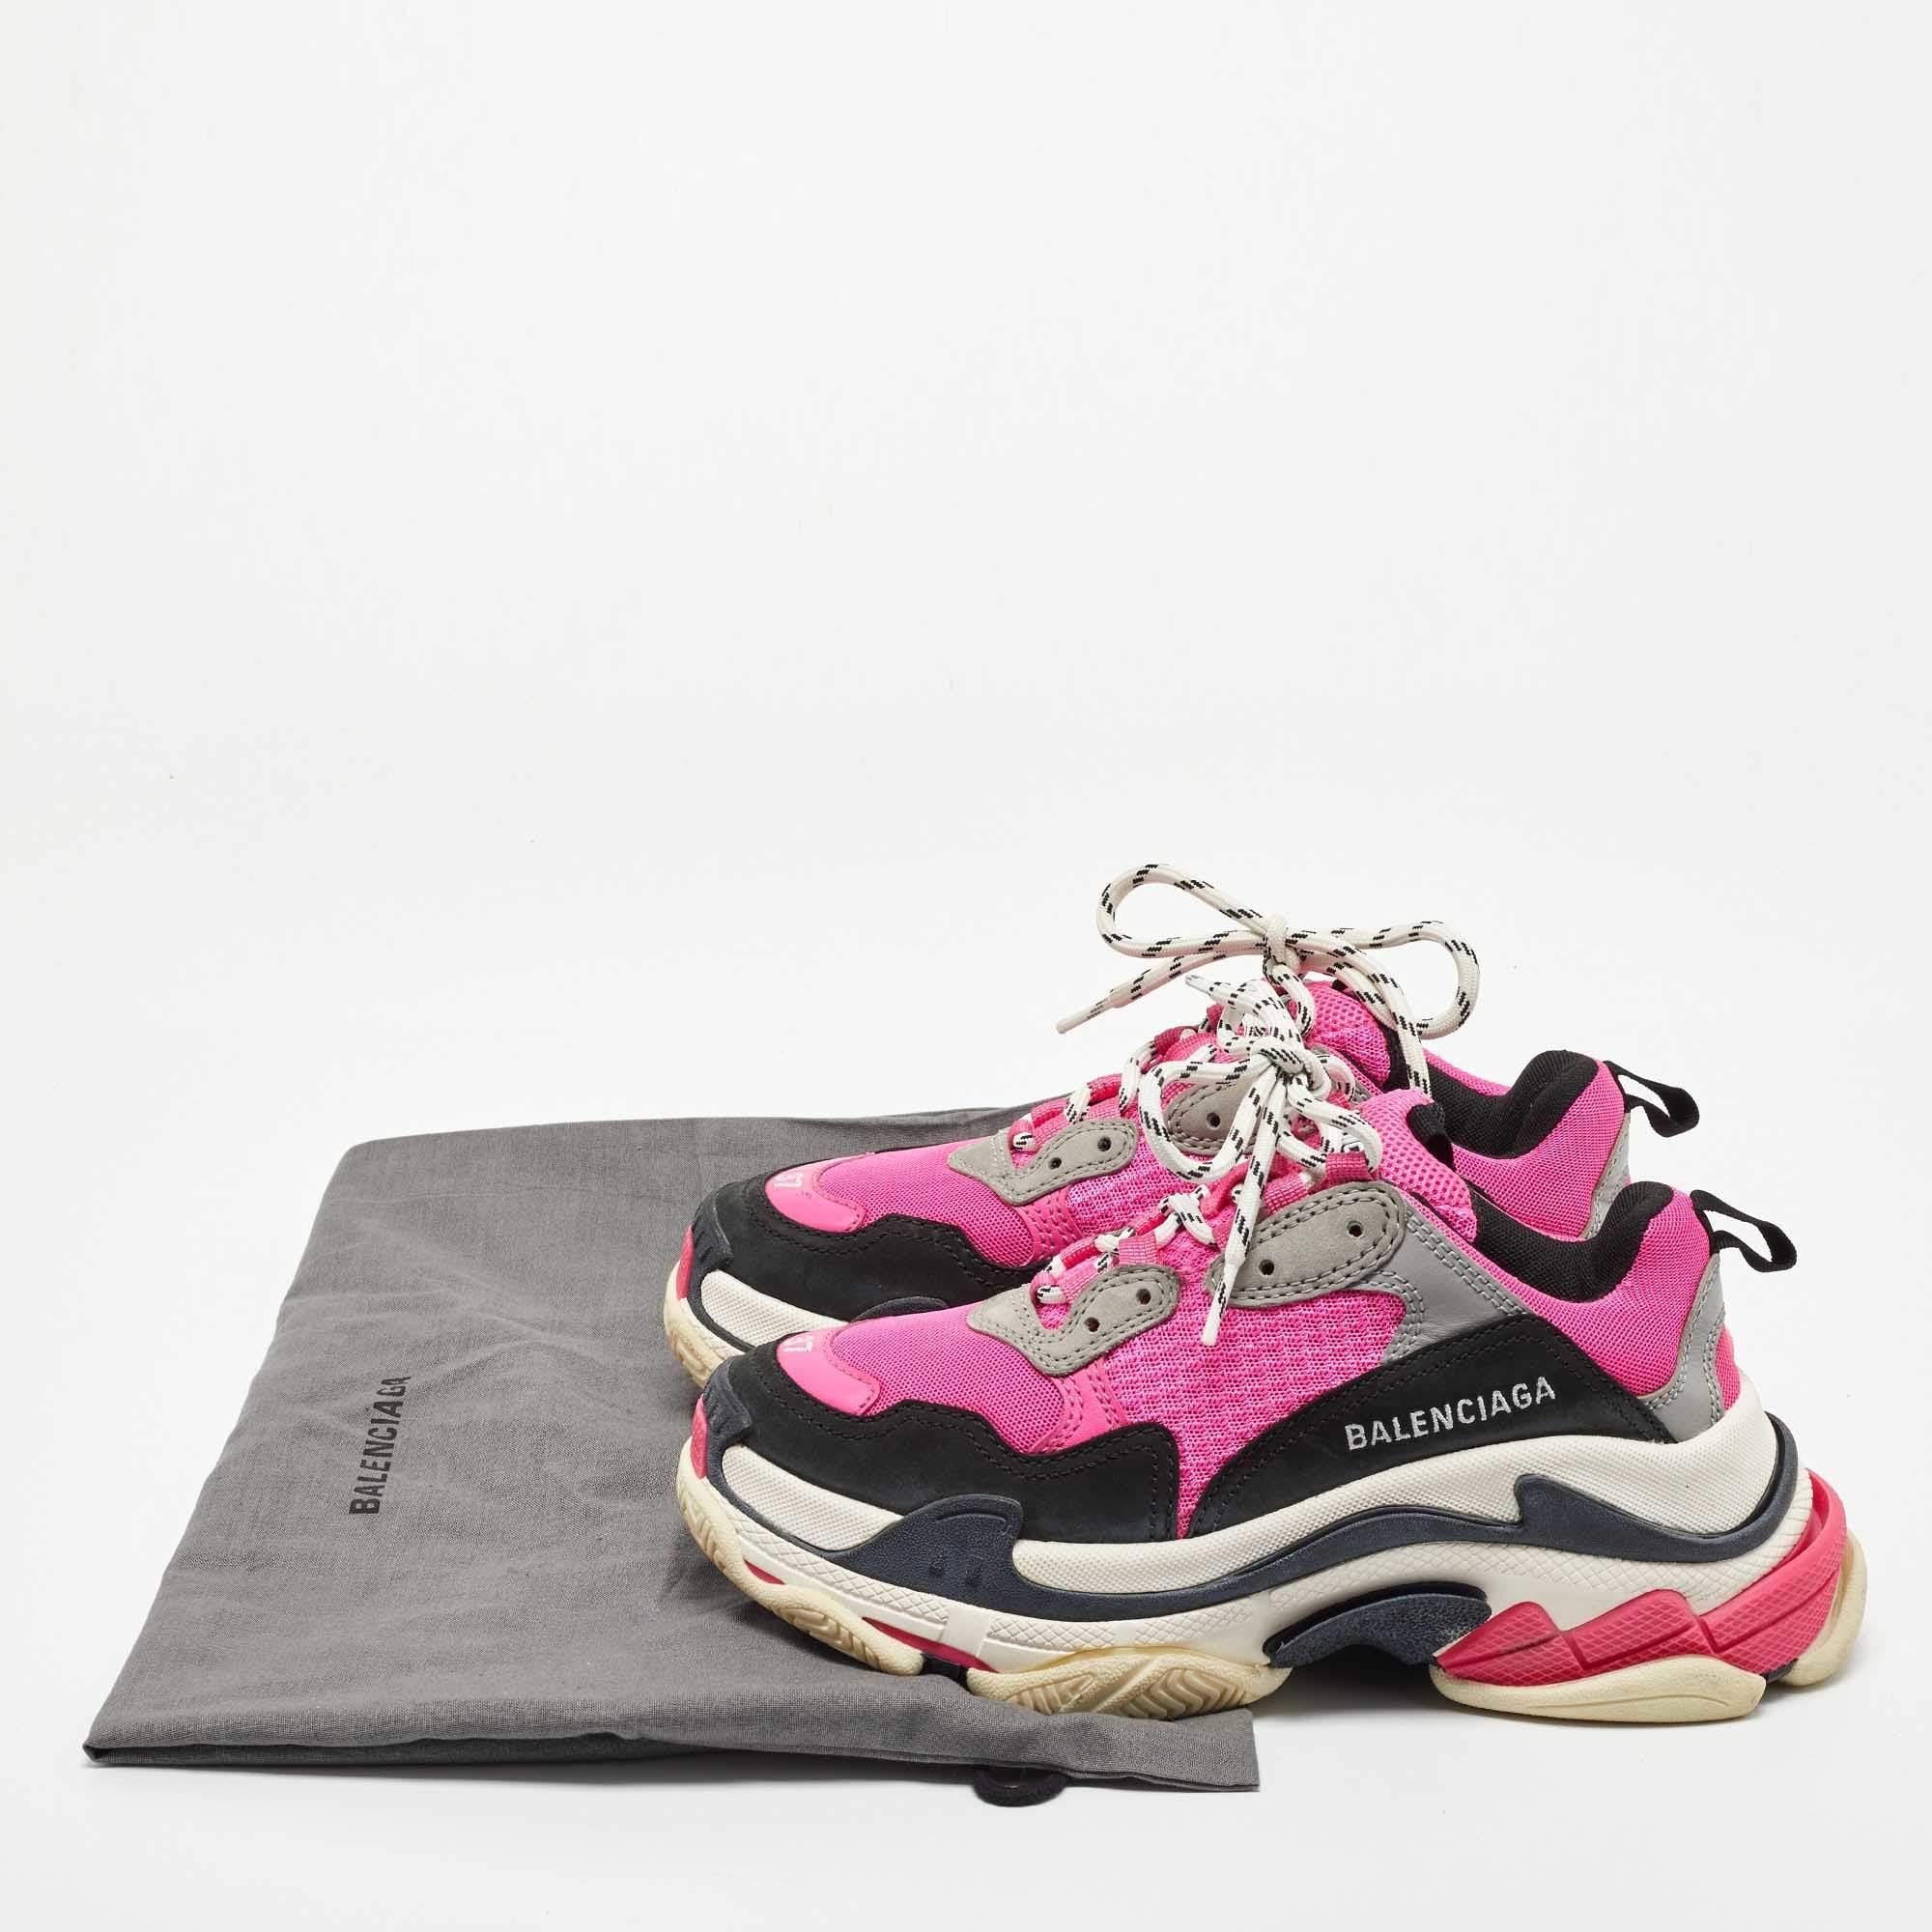 Balenciaga Pink/Black Mesh and Leather Triple S Sneakers Size 37 For Sale 5